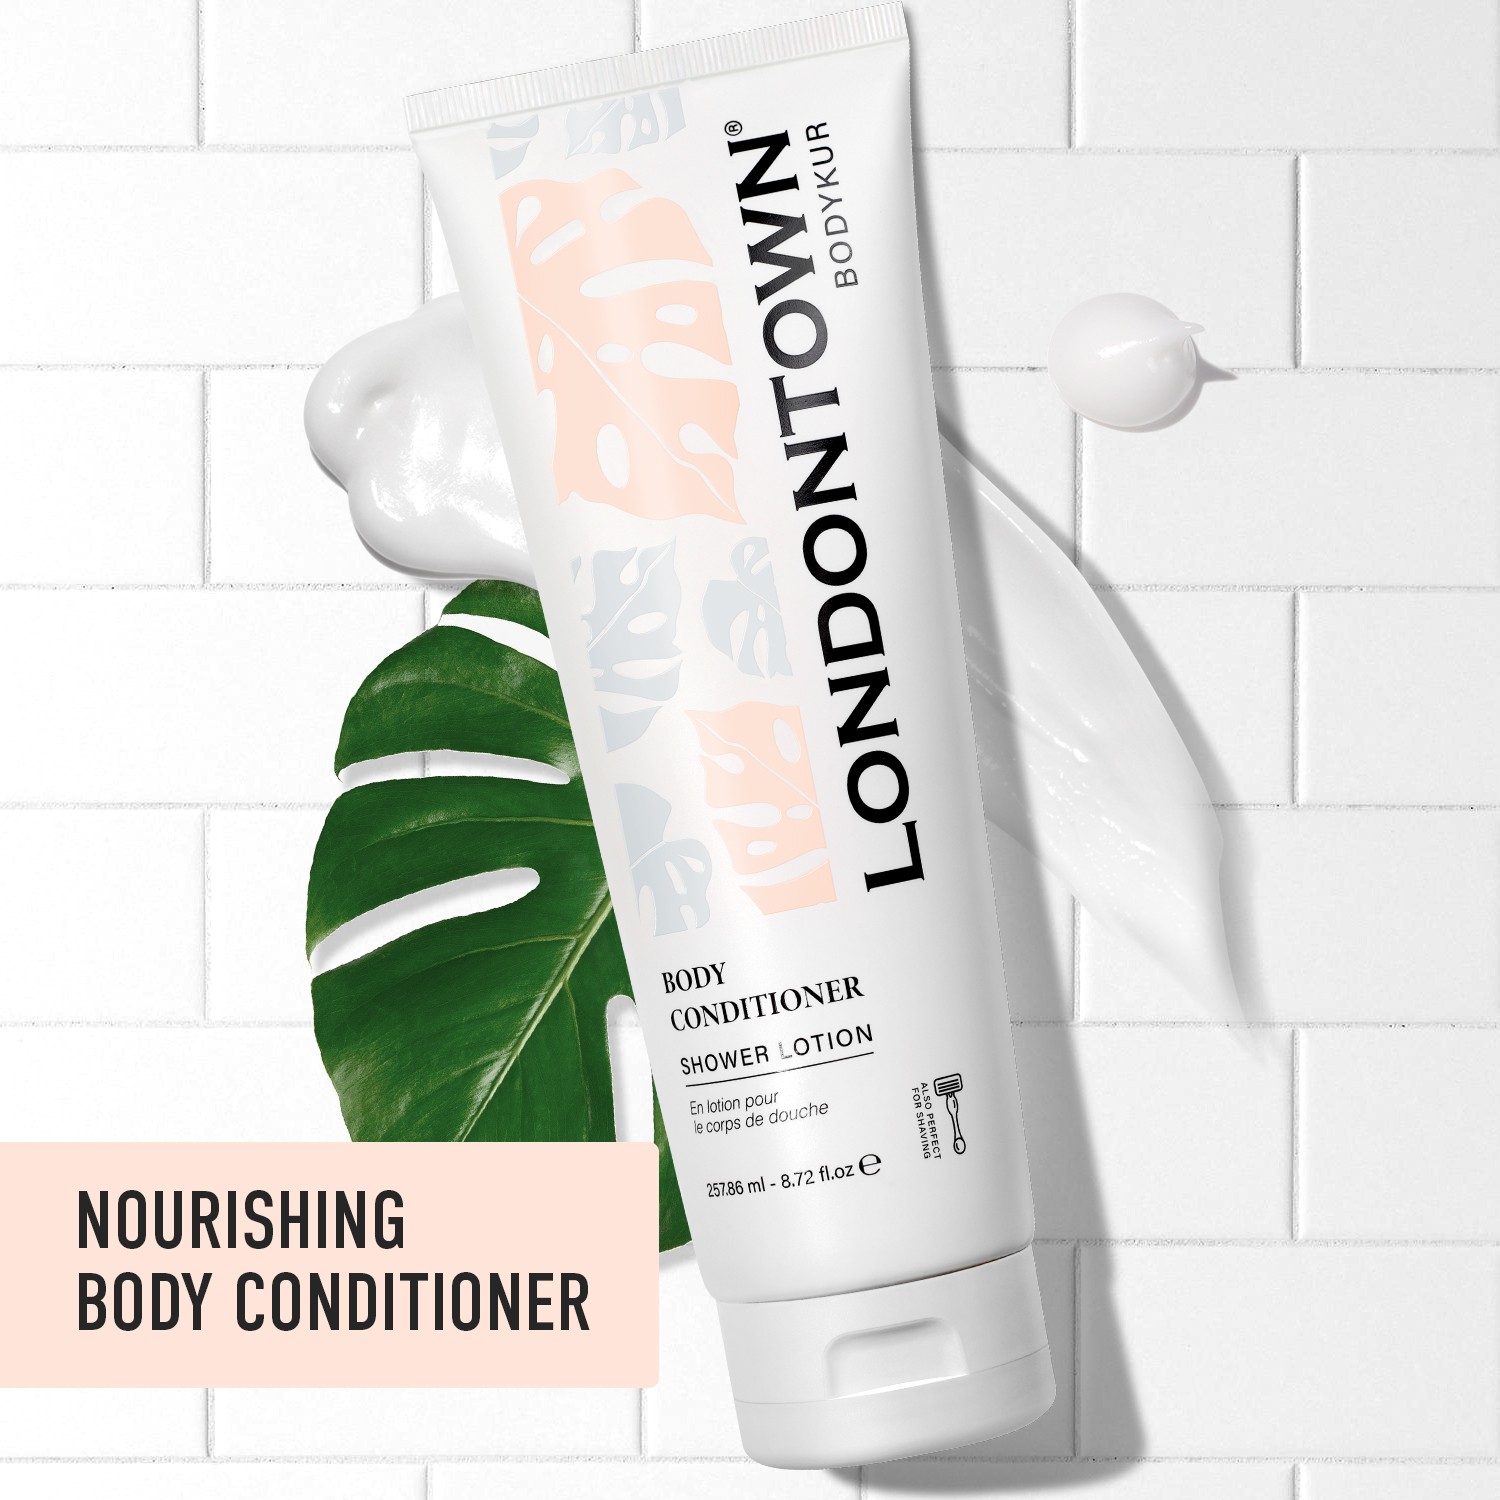 Body Conditioner Paid Social 1×1